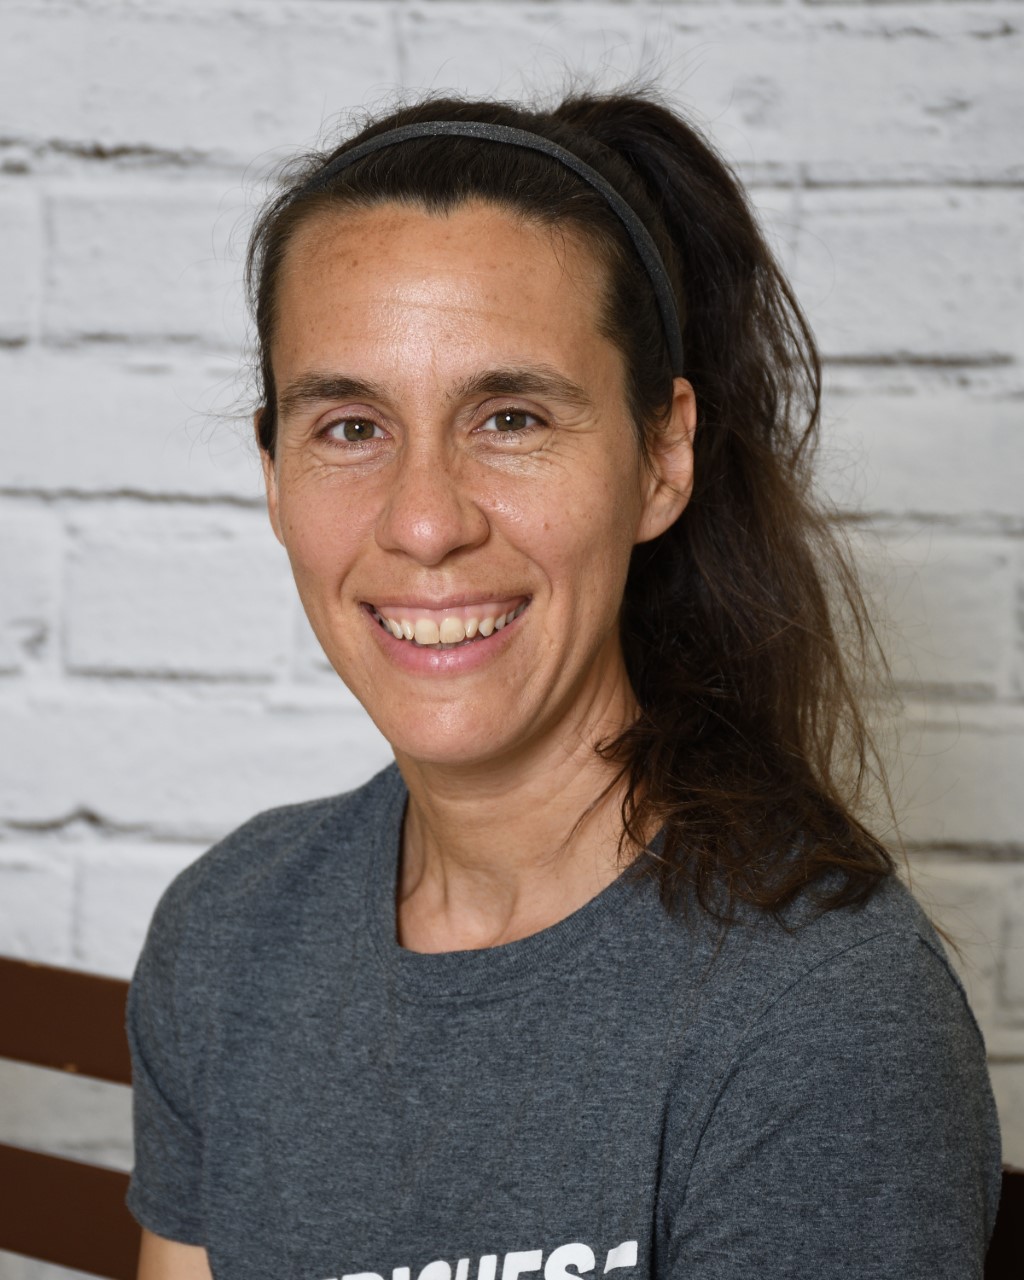 Woman wearing a grey t-shirt smiling. She has dark brown hair in a ponytail. 